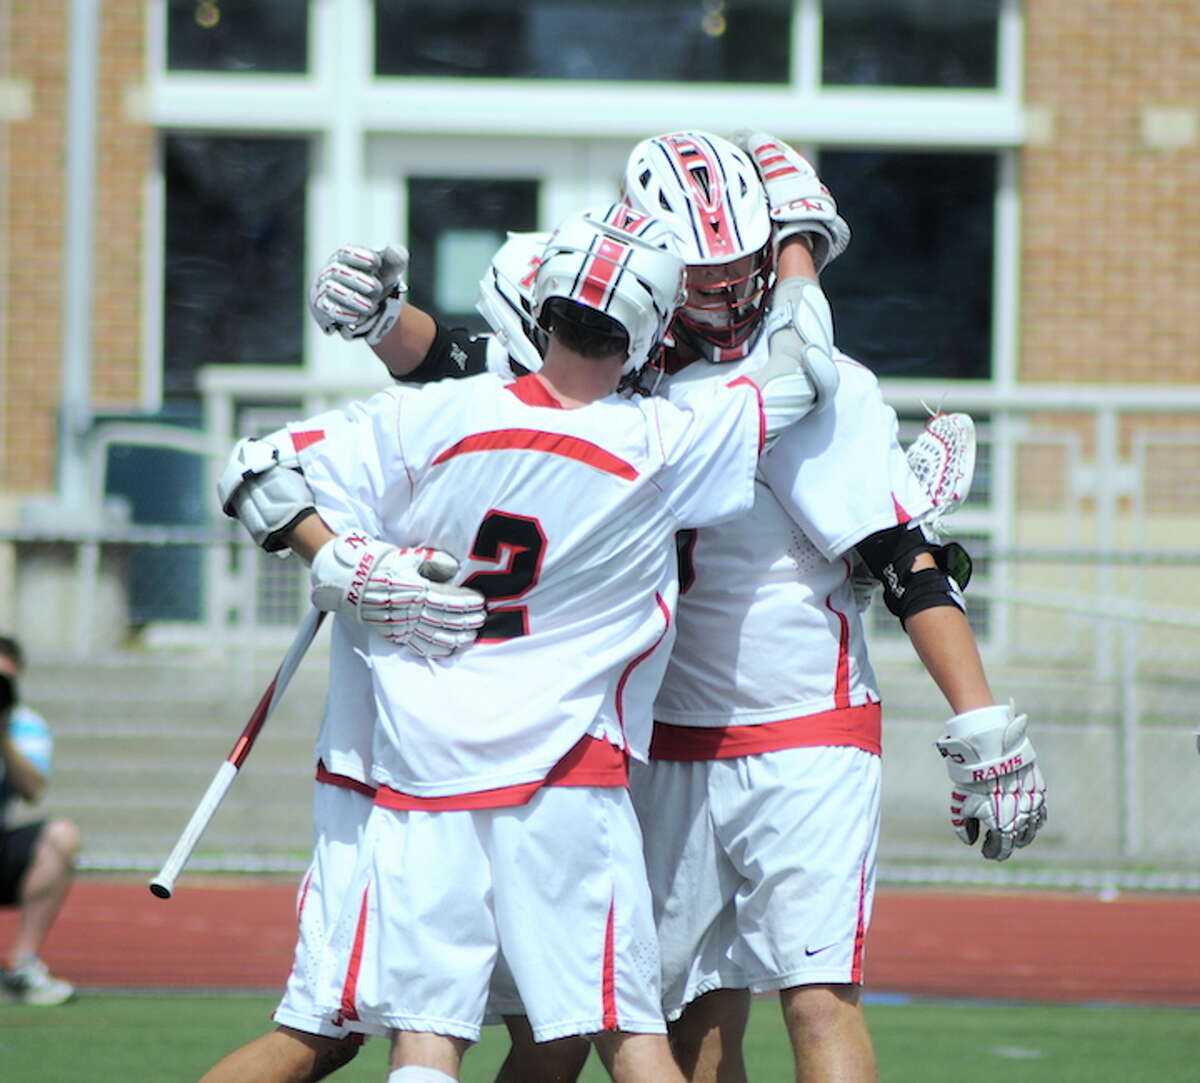 New Canaan’s players celebrate with Justin Meichner (2) after one of his goals vs. Hand during the Class M boys lacrosse championship (Photo Sean Meenaghan)